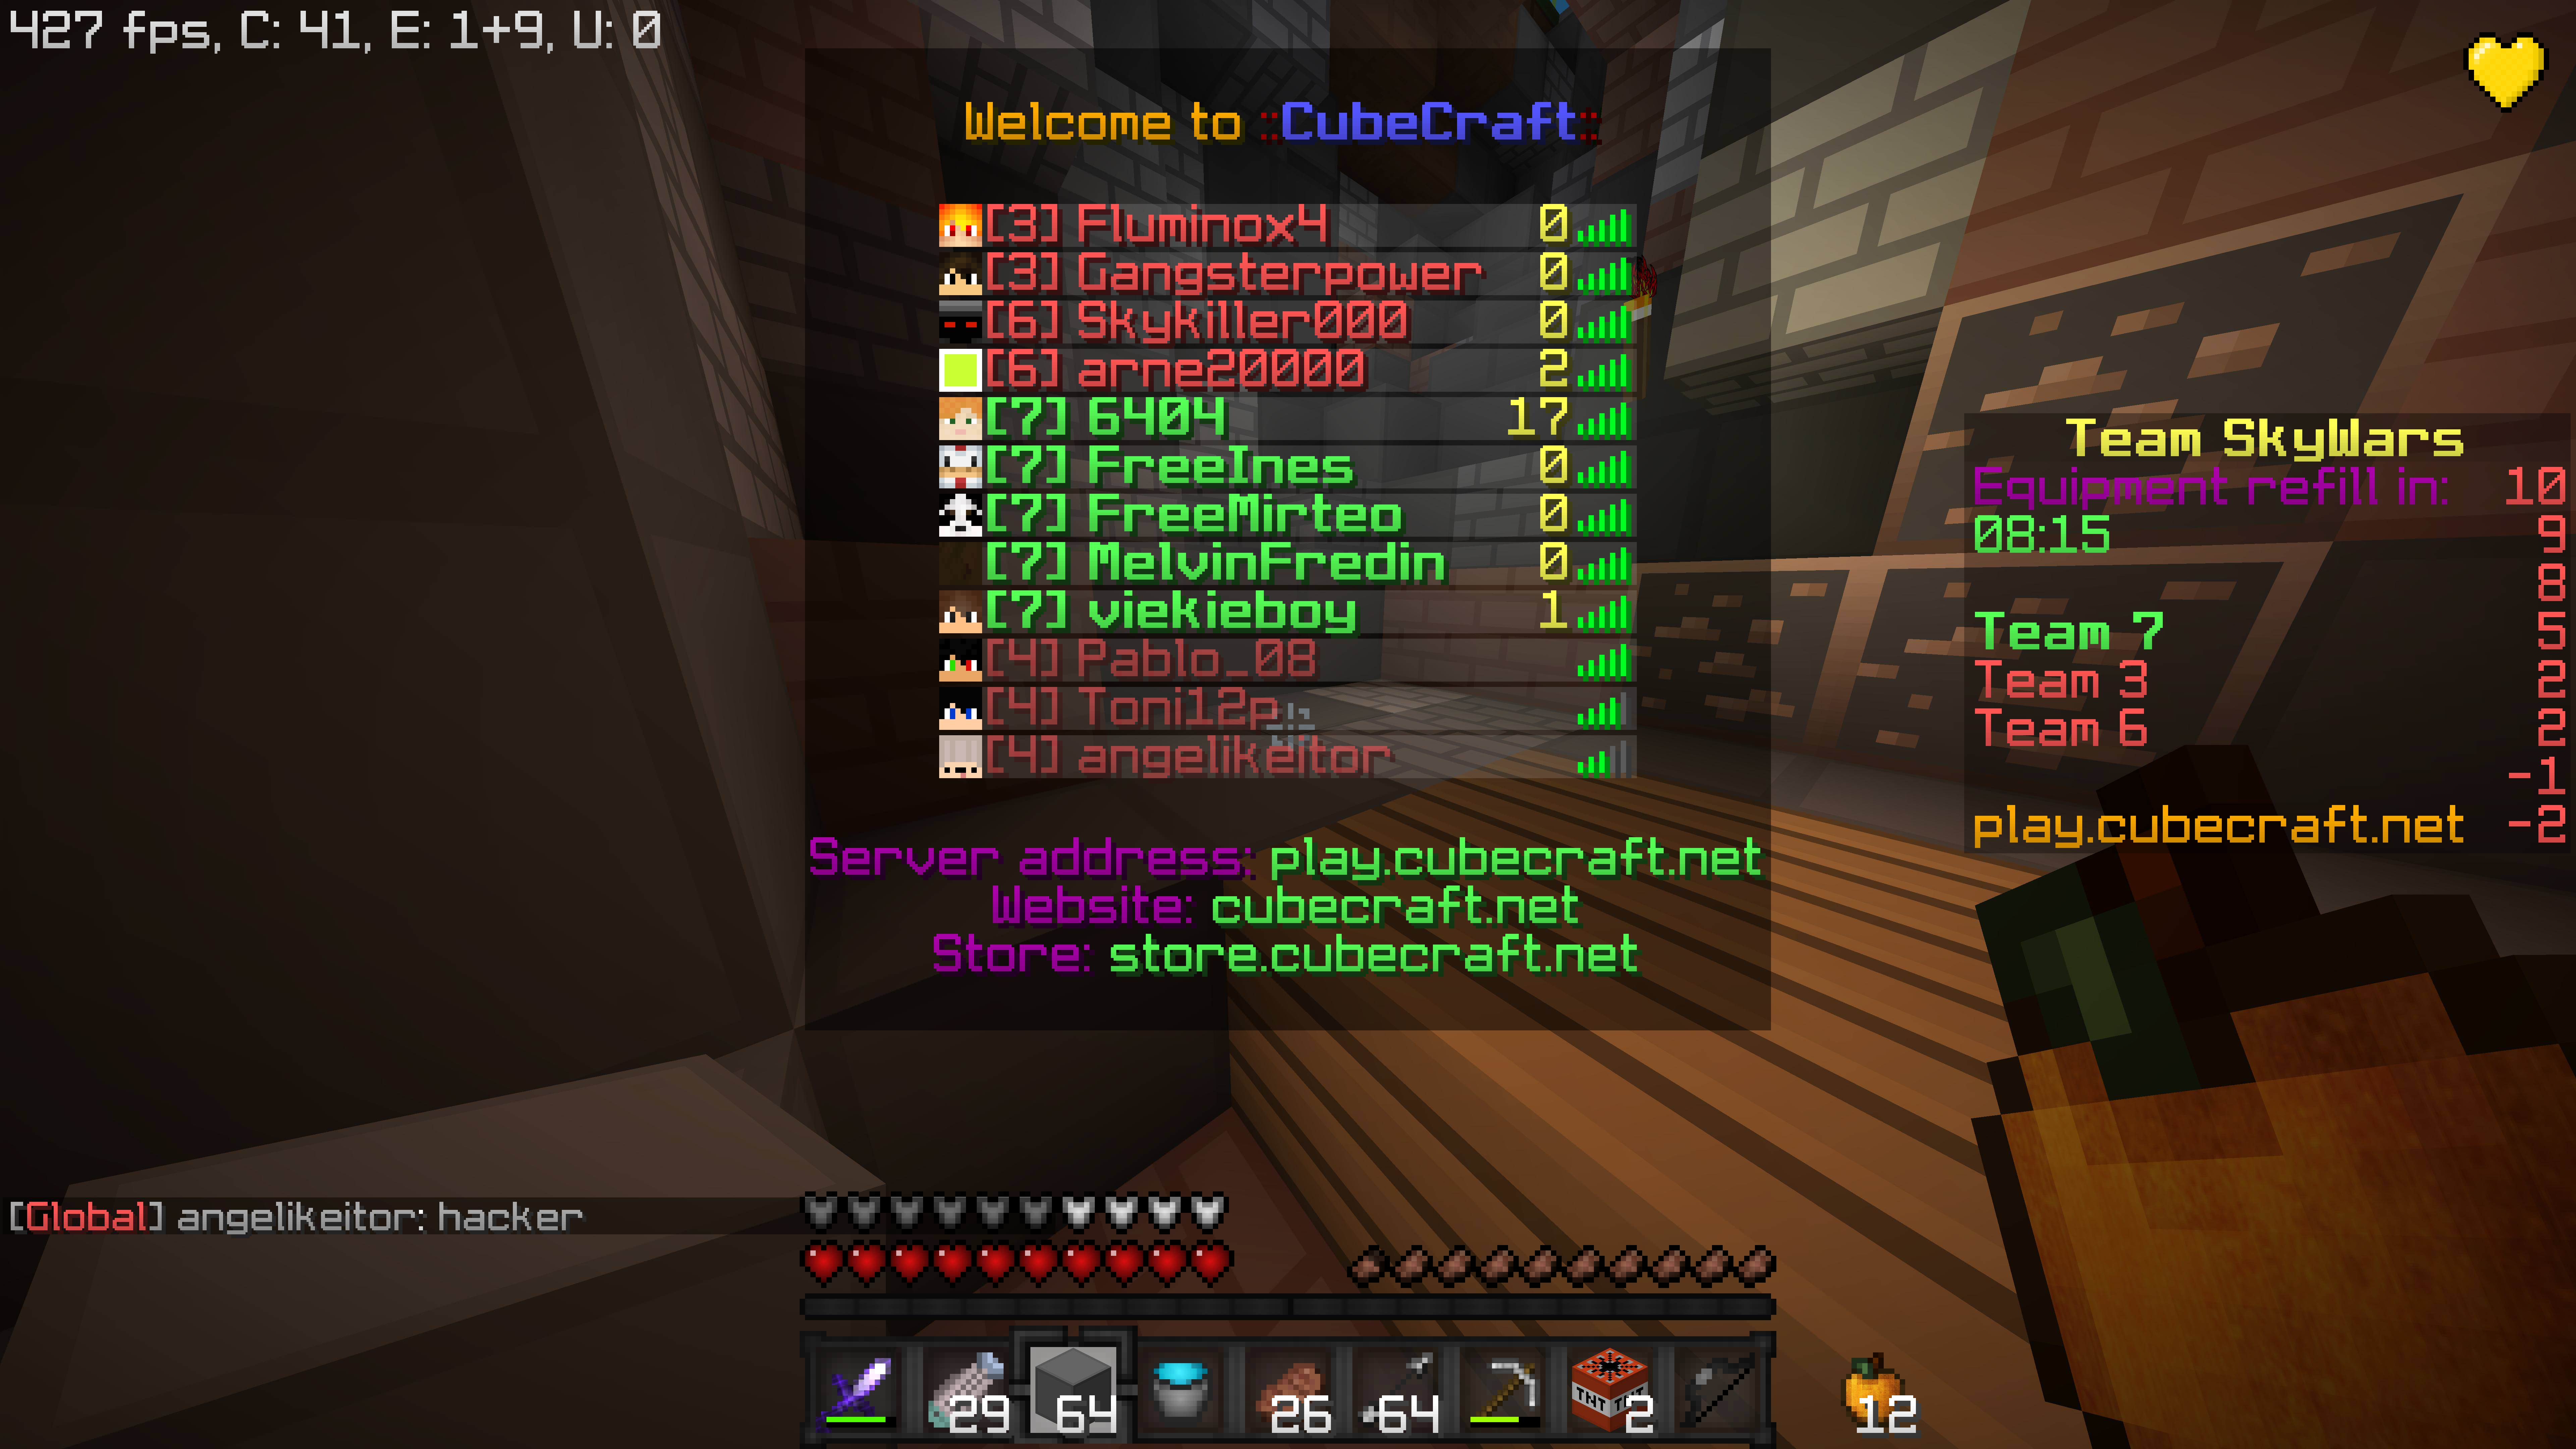 Cubecraft global chat